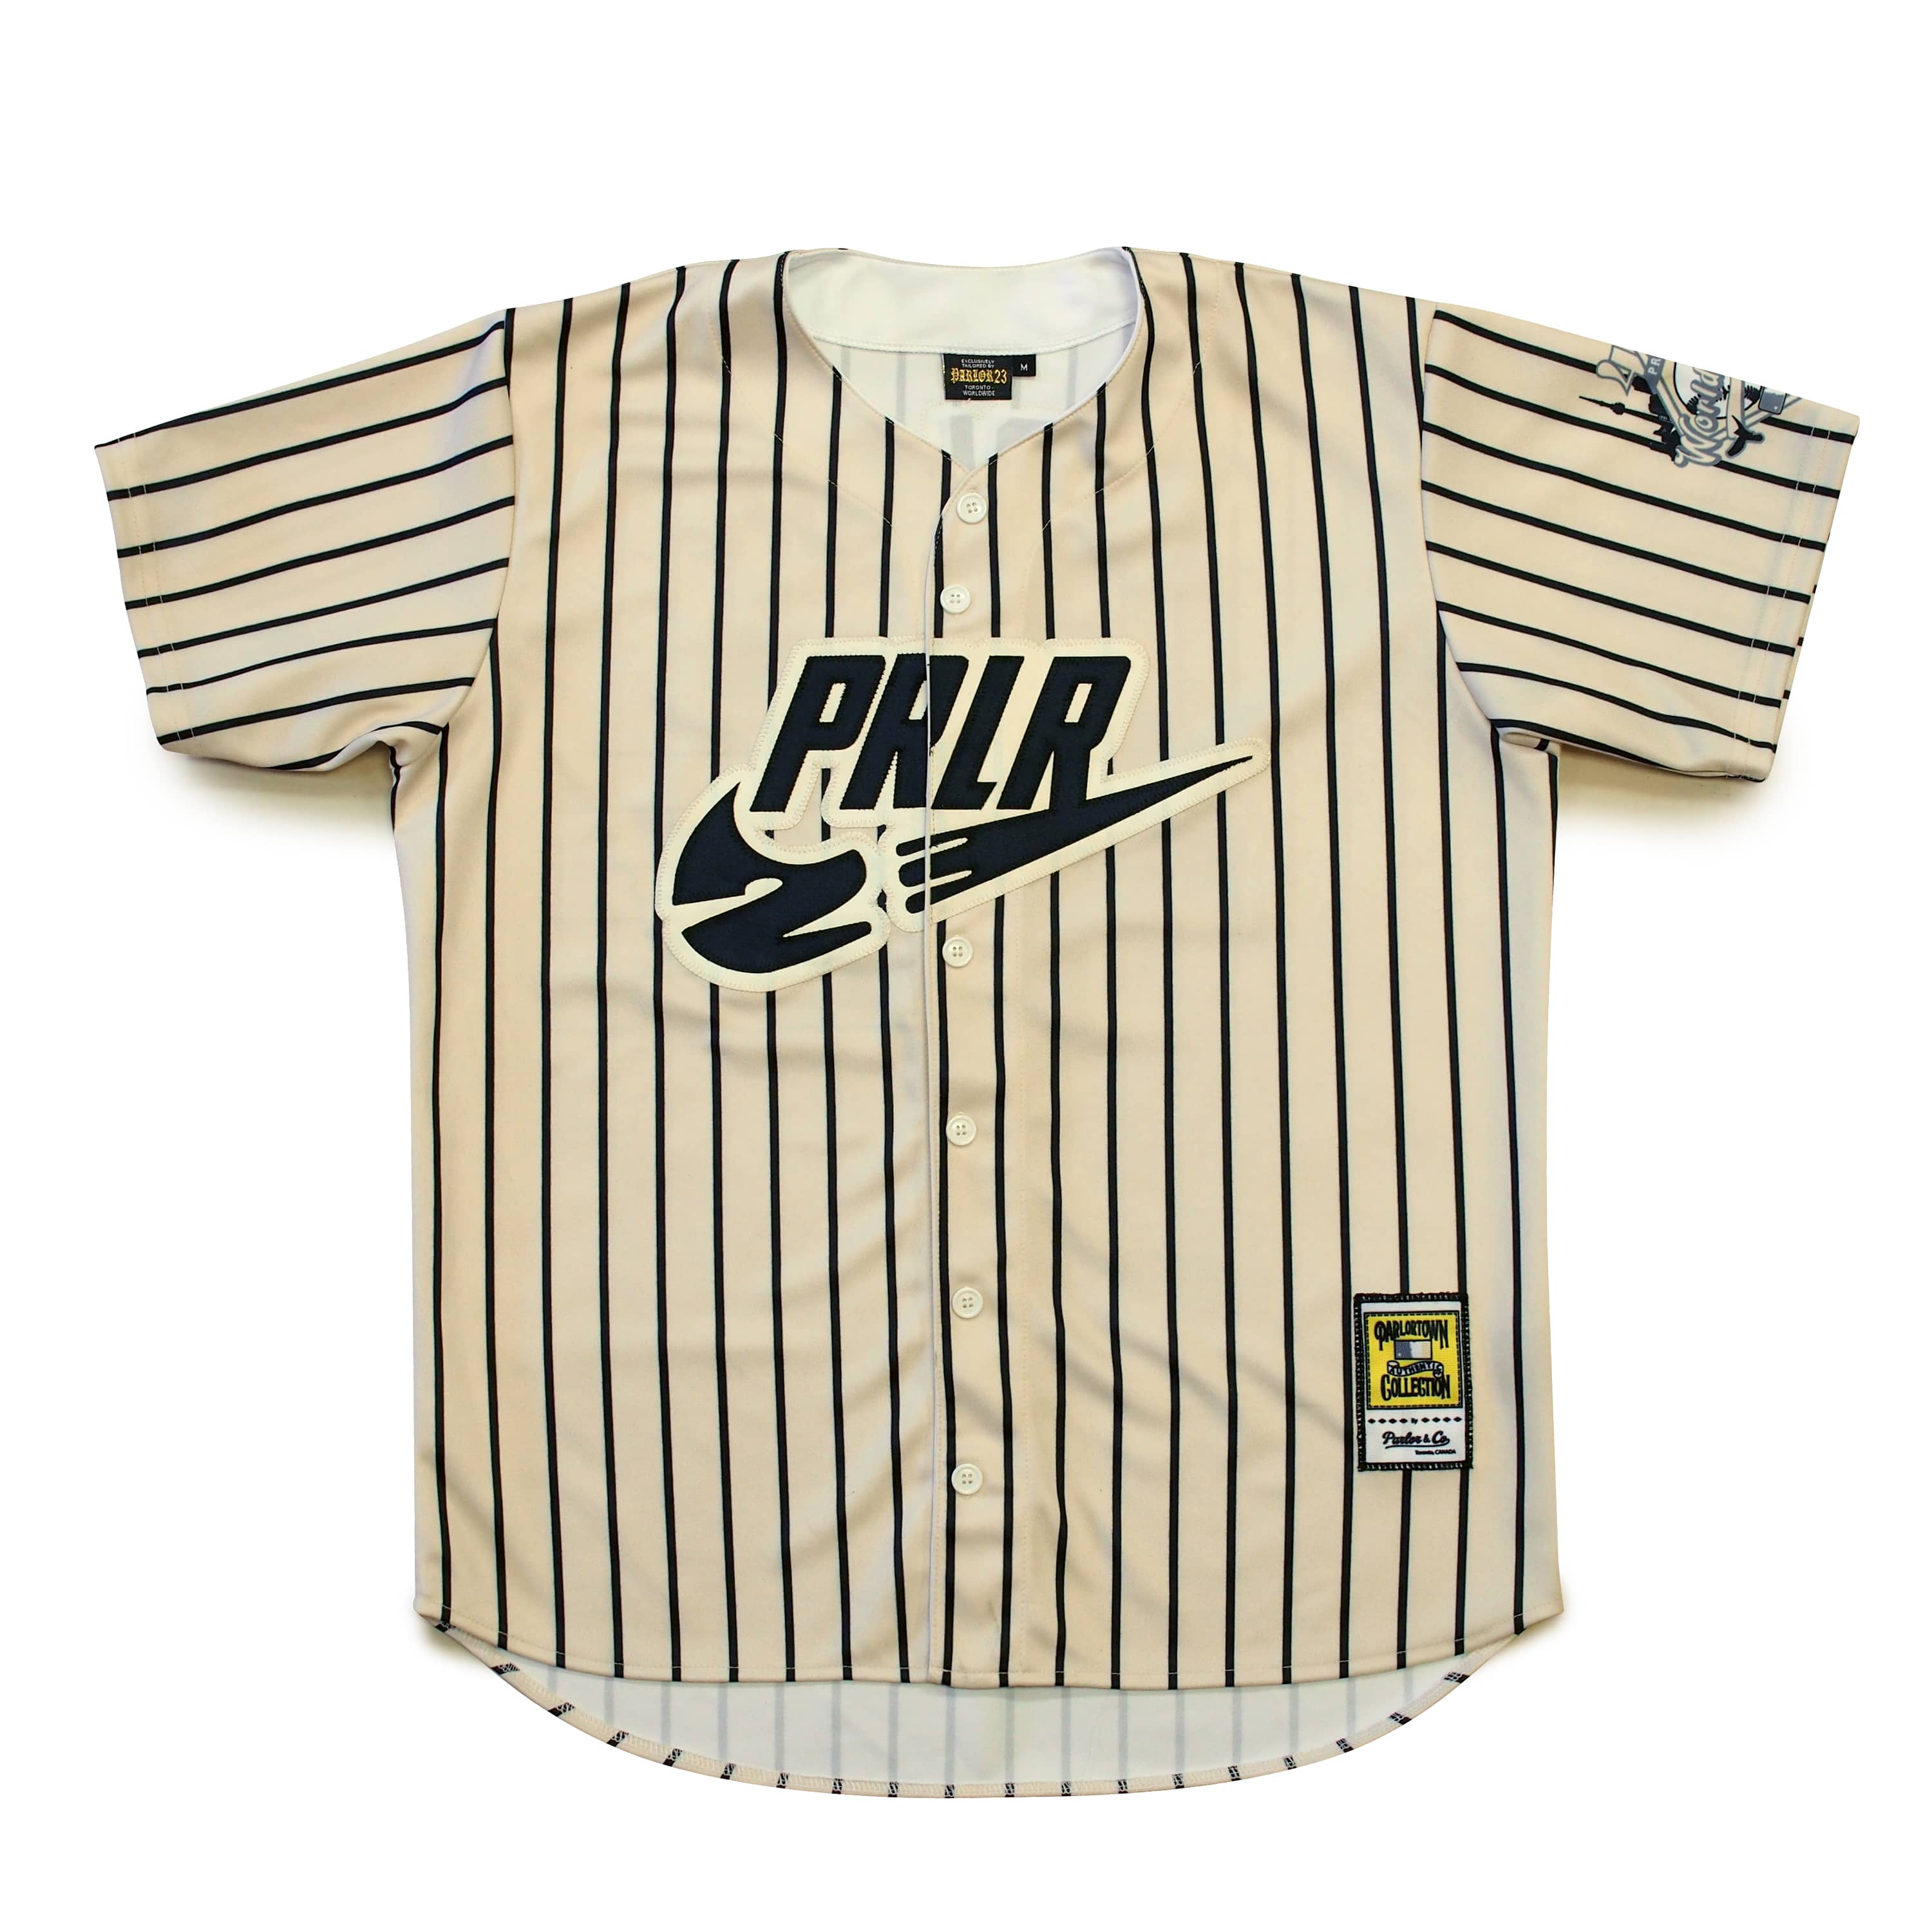 Parlor 23 "PRLR 45" Made In Canada Jersey